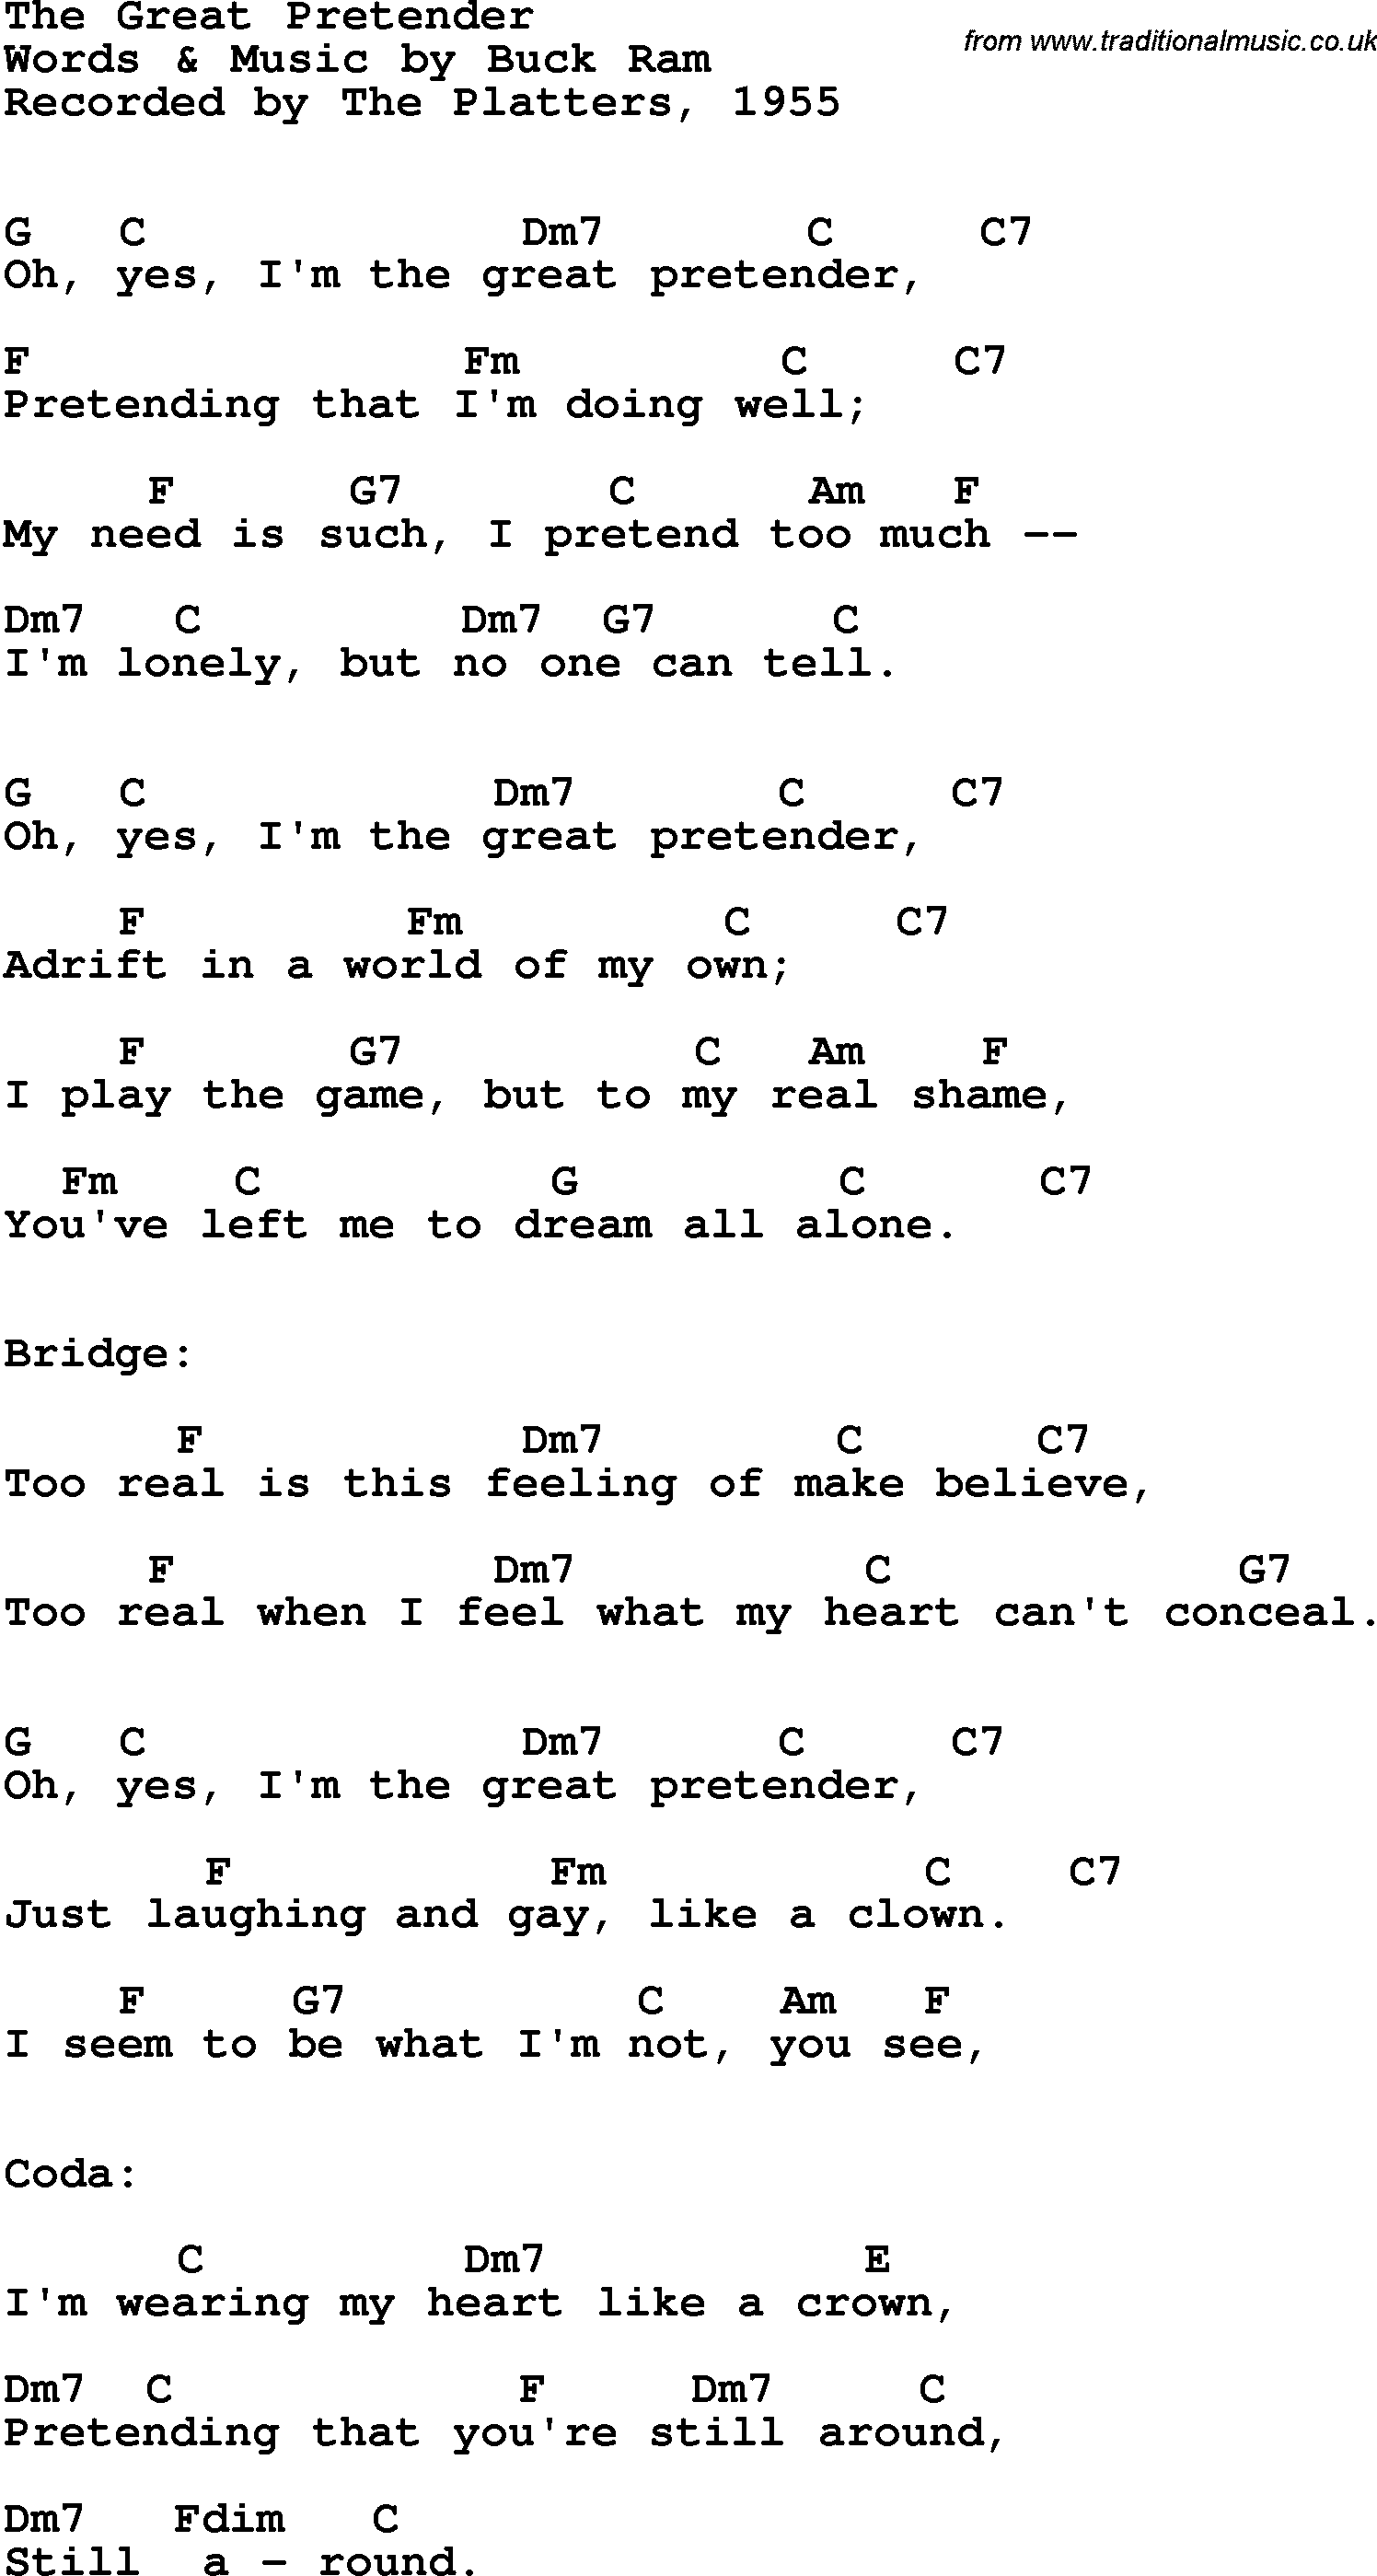 Song Lyrics with guitar chords for Great Pretender, The - The Platters, 1955